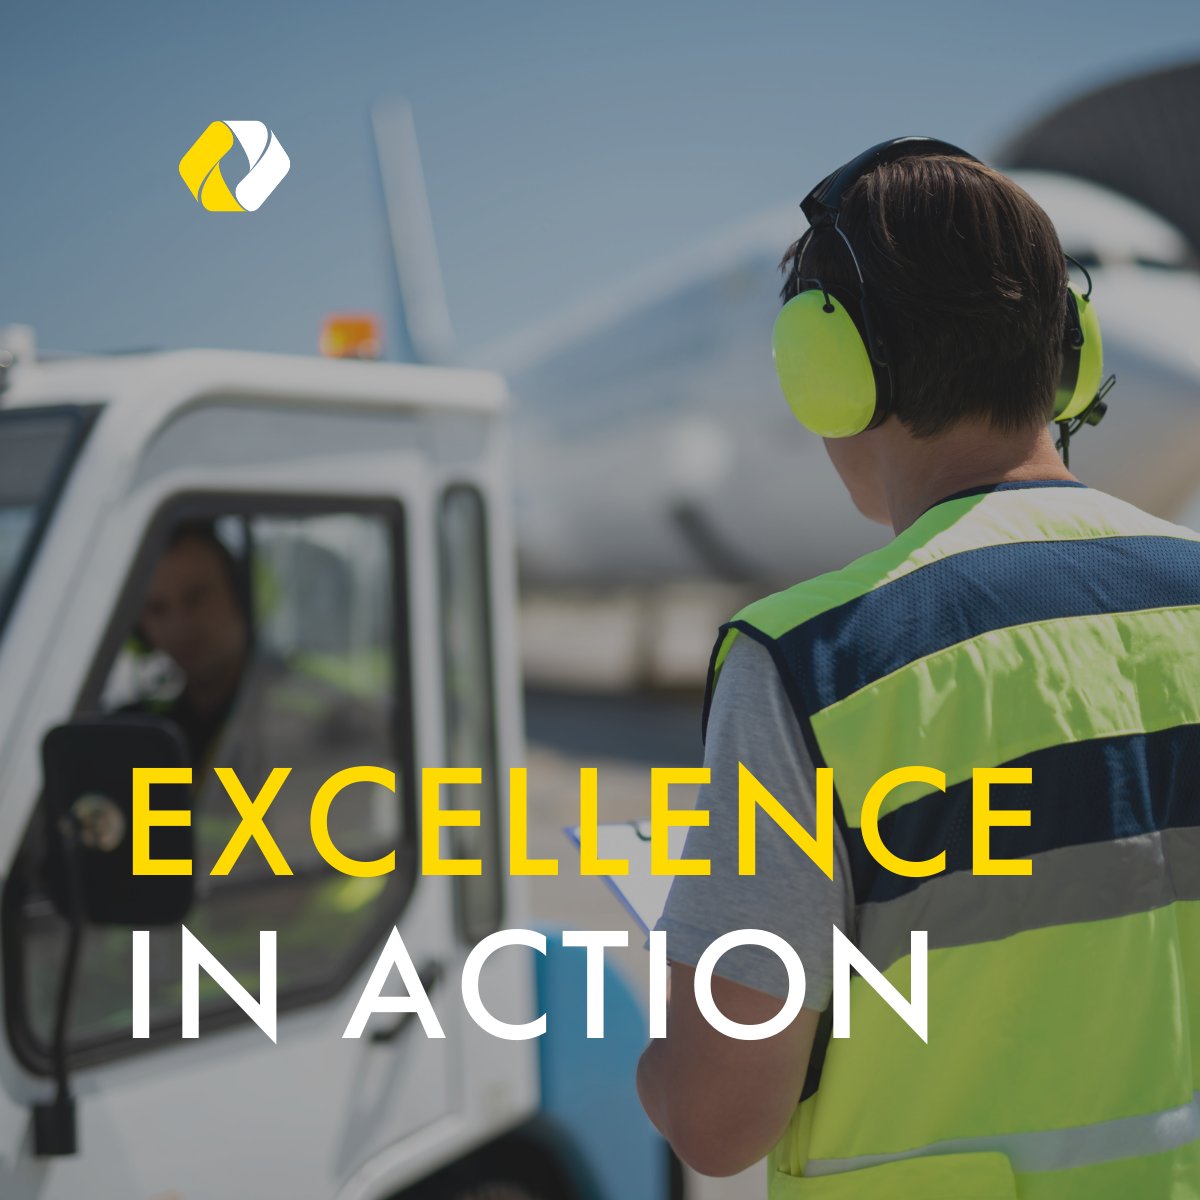 Experience seamless operations with iFuel's Ground Handling Services. Our team ensures a smooth journey from touchdown to takeoff. 

Contact us today for exceptional ground handling services!

#iFuel #GroundHandling #AviationServices